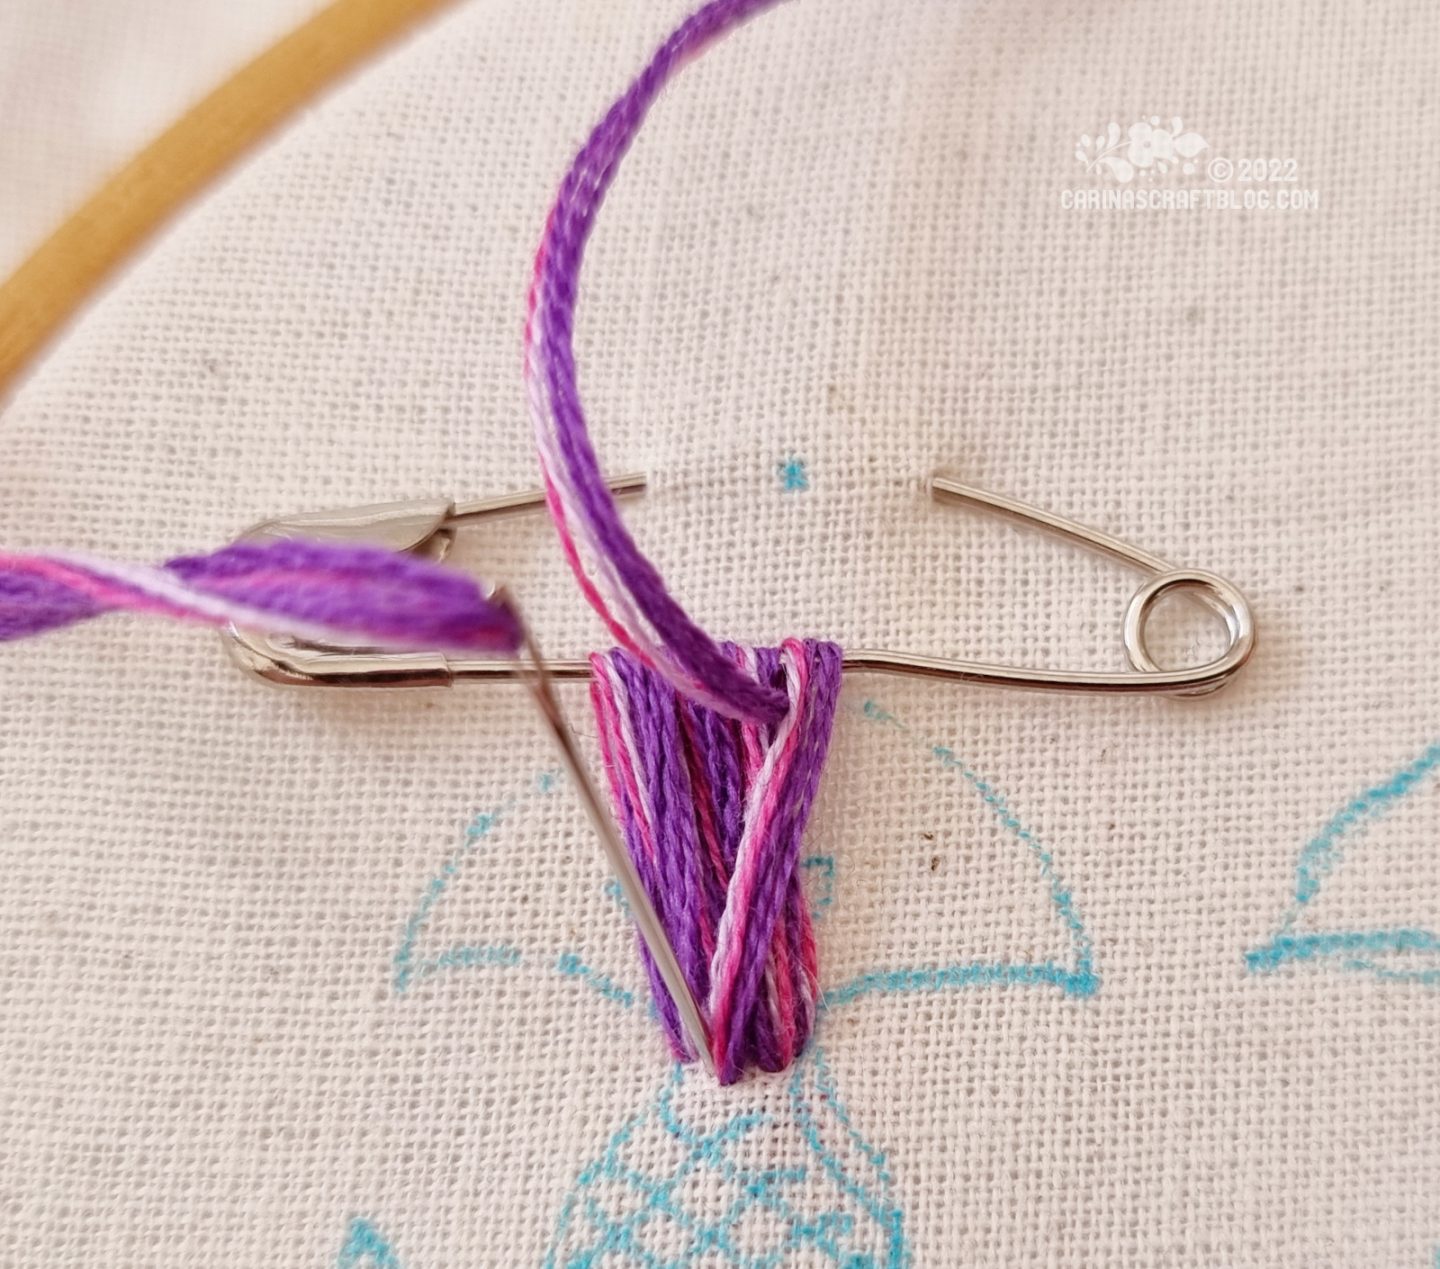 Closeup of a safety pin attached to white fabric. Embroidery thread in purple colours has been looped through the safety pin several times.